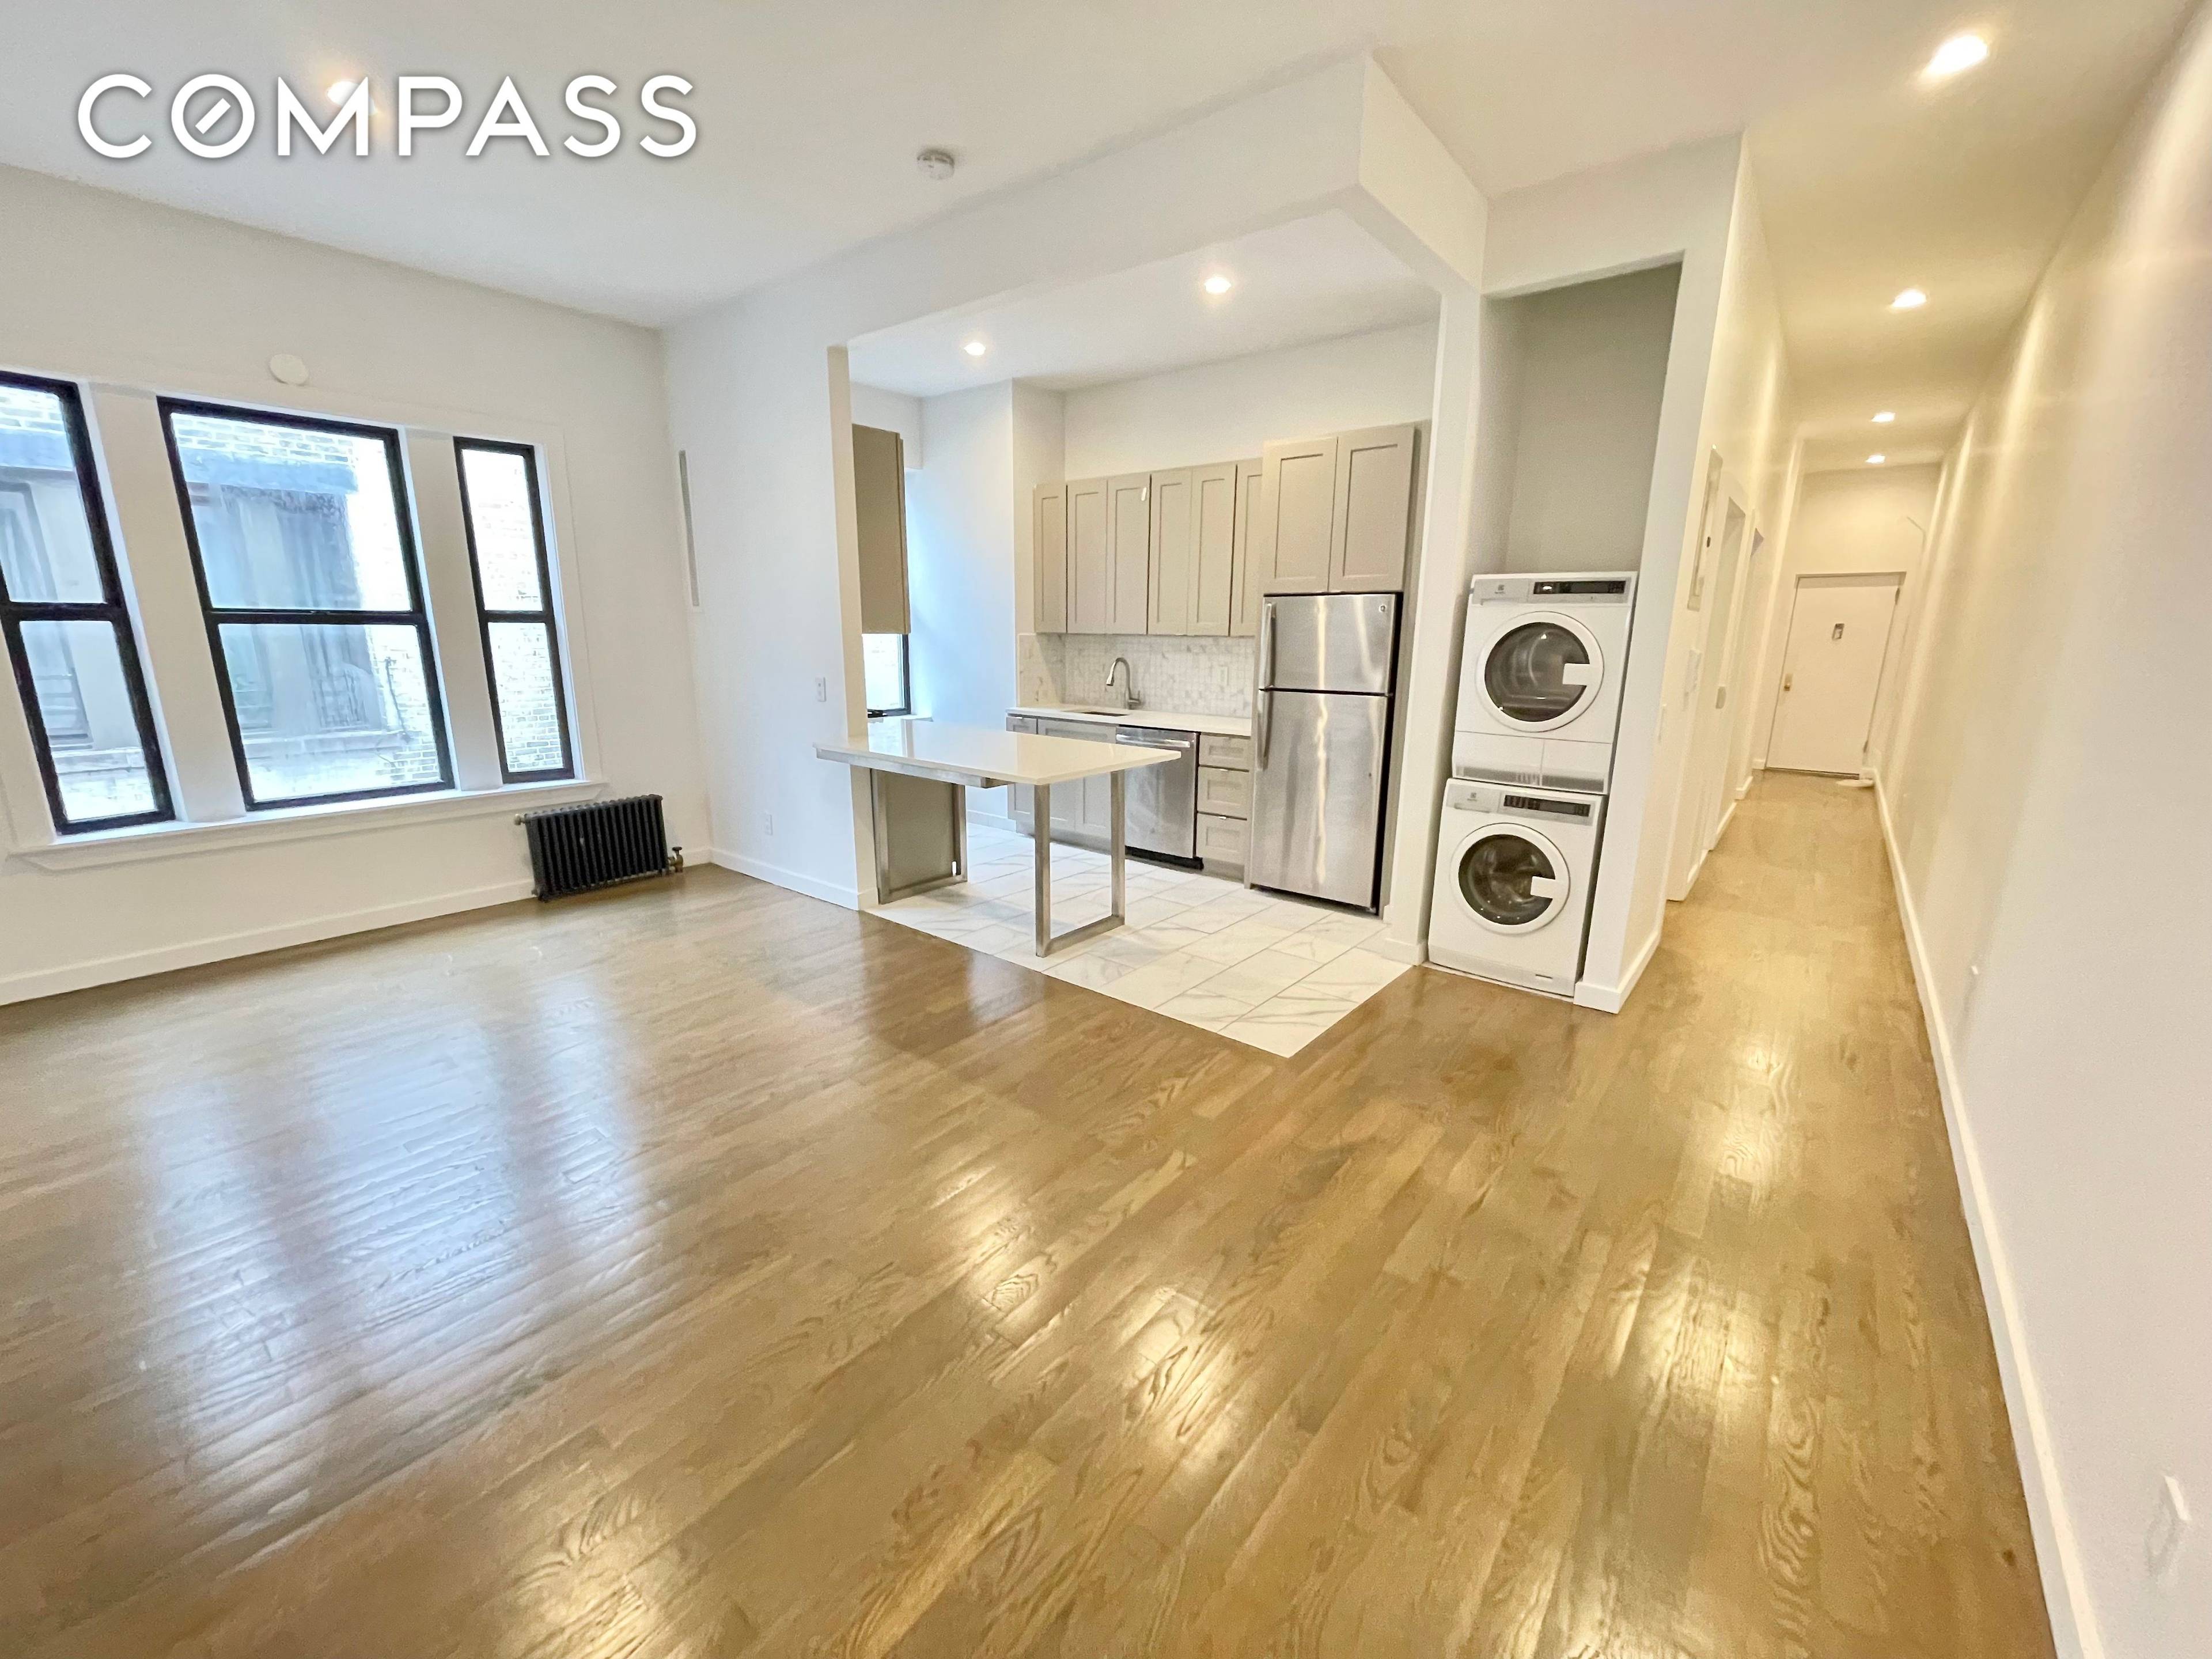 This massive 4 bedroom 2 bath apartment has been newly renovated.